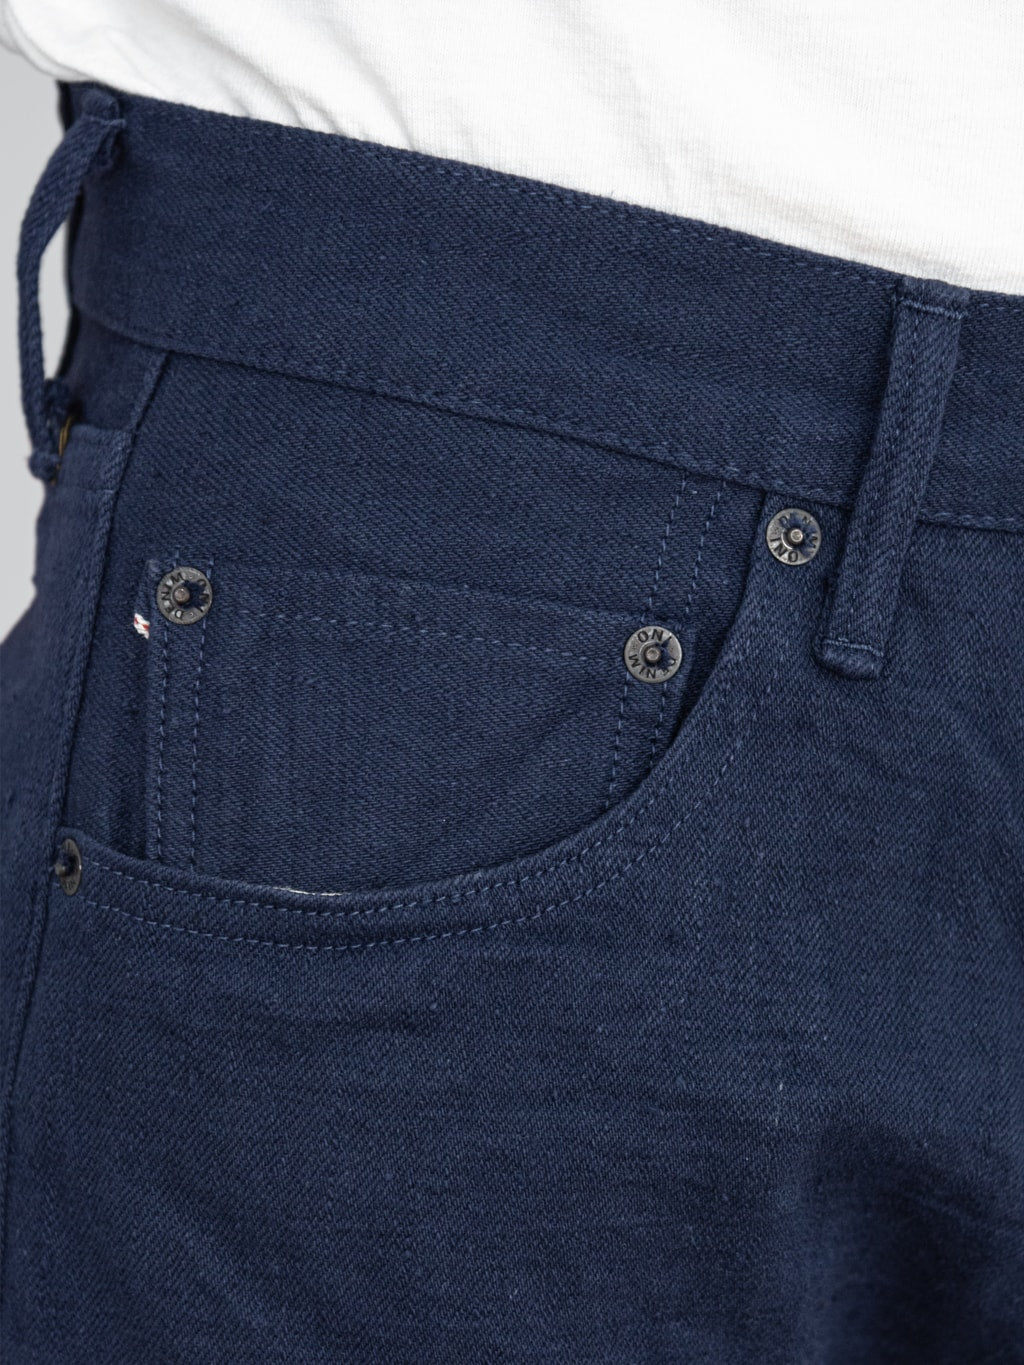 ONI Denim 612 Super Low Tension Navy Relaxed Tapered Jeans coin pocket